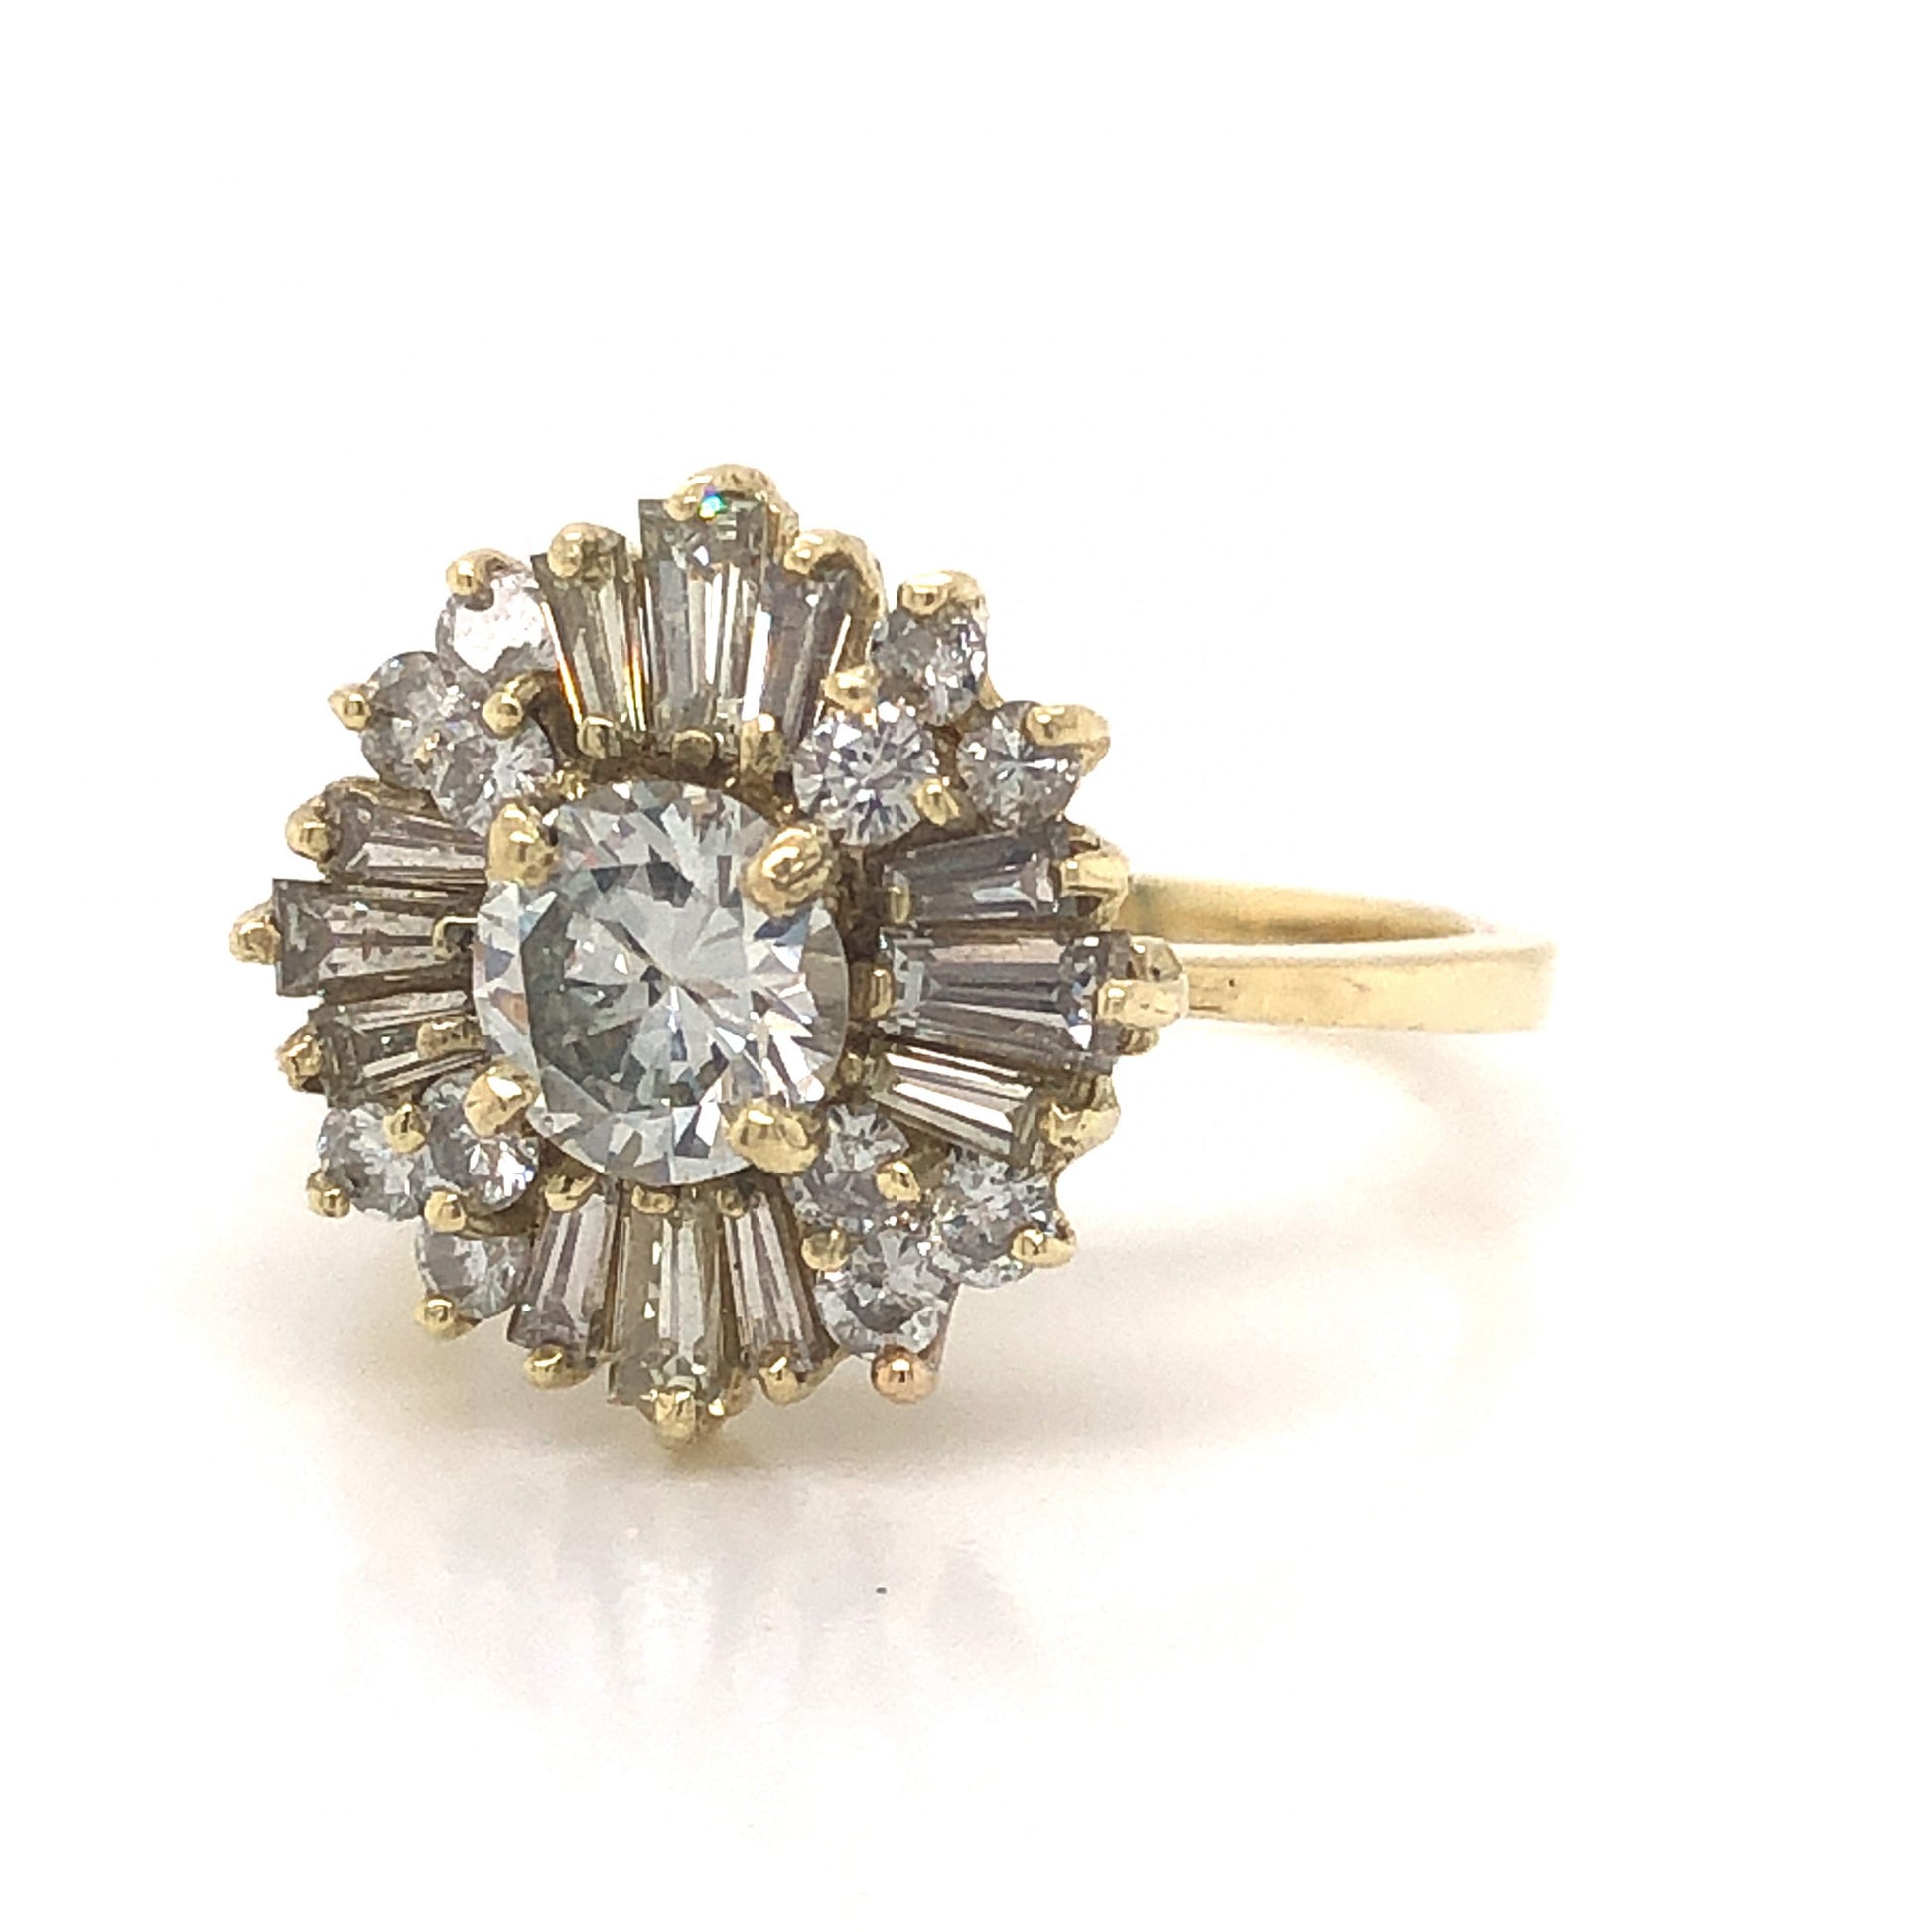 Round Ballerina Halo Diamond Engagement Ring in 14k Yellow GoldComposition: 14 Karat Yellow Gold Ring Size: 5 Total Diamond Weight: 1.46ct Total Gram Weight: 3.88 g Inscription: 14k
      